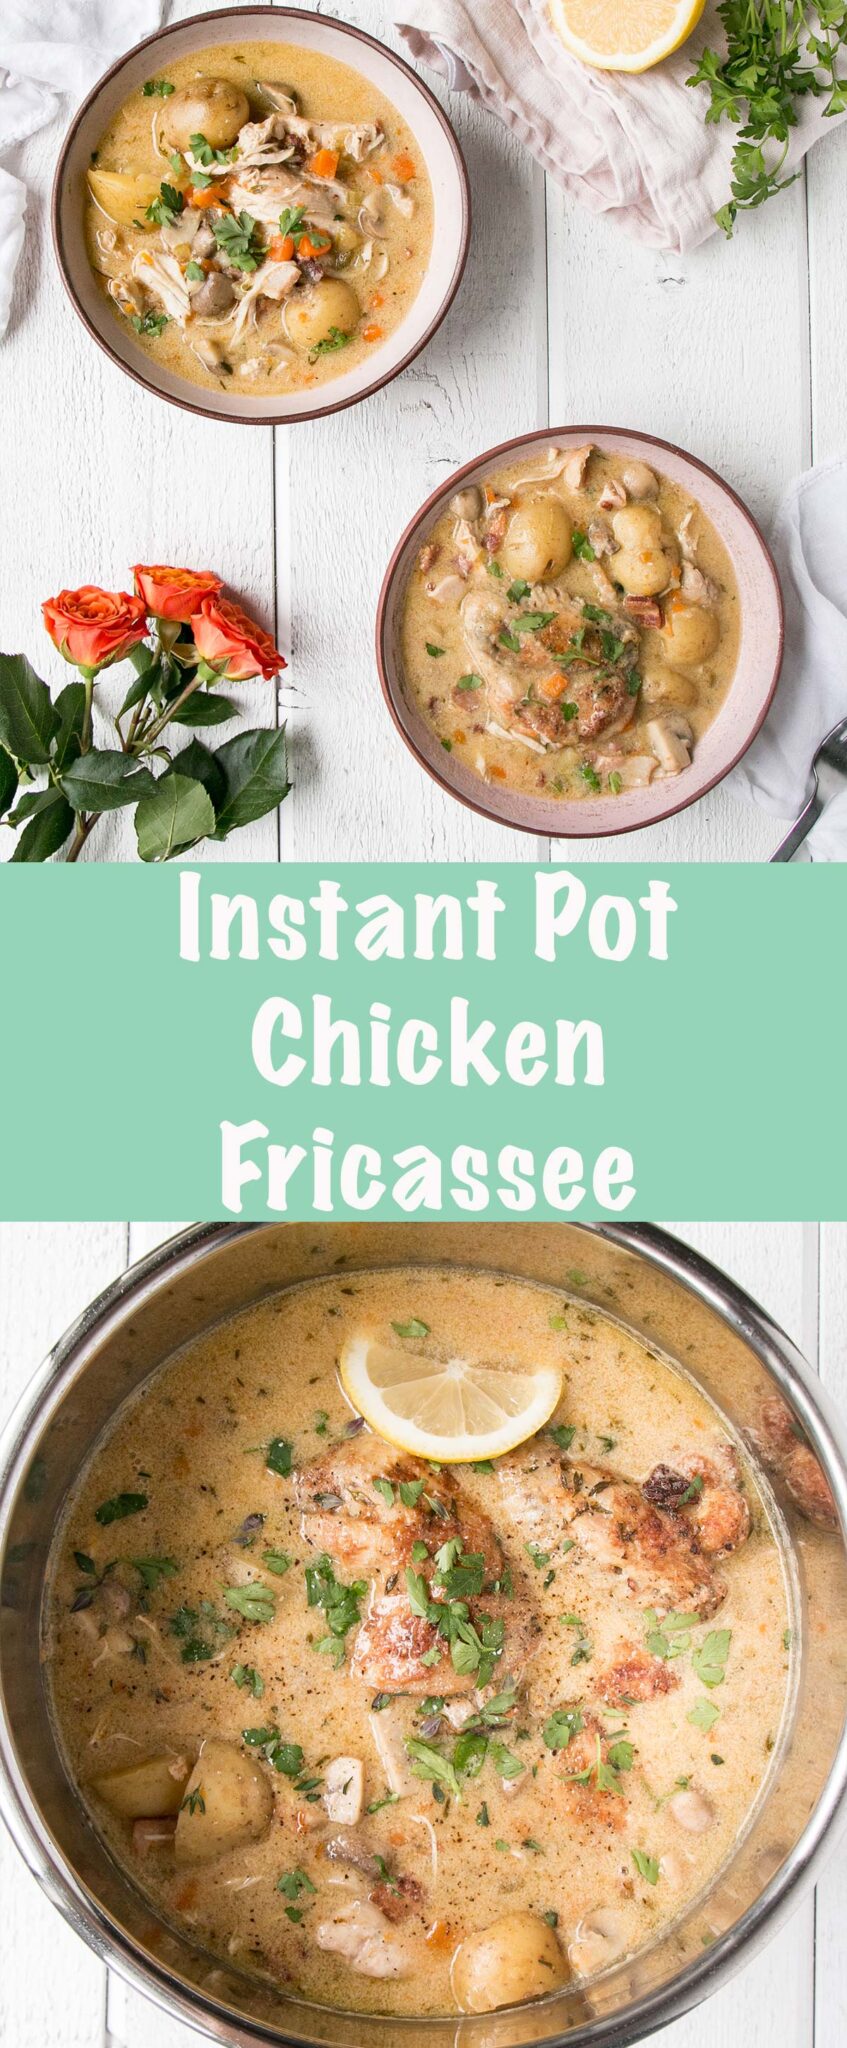 Instant Pot Chicken Fricassee is a classic French Chicken Stew made easy and quick thanks to the Instant Pot! Comfort food defined with a silky broth, tender chicken, and hearty vegetables.  via @mykitchenlove